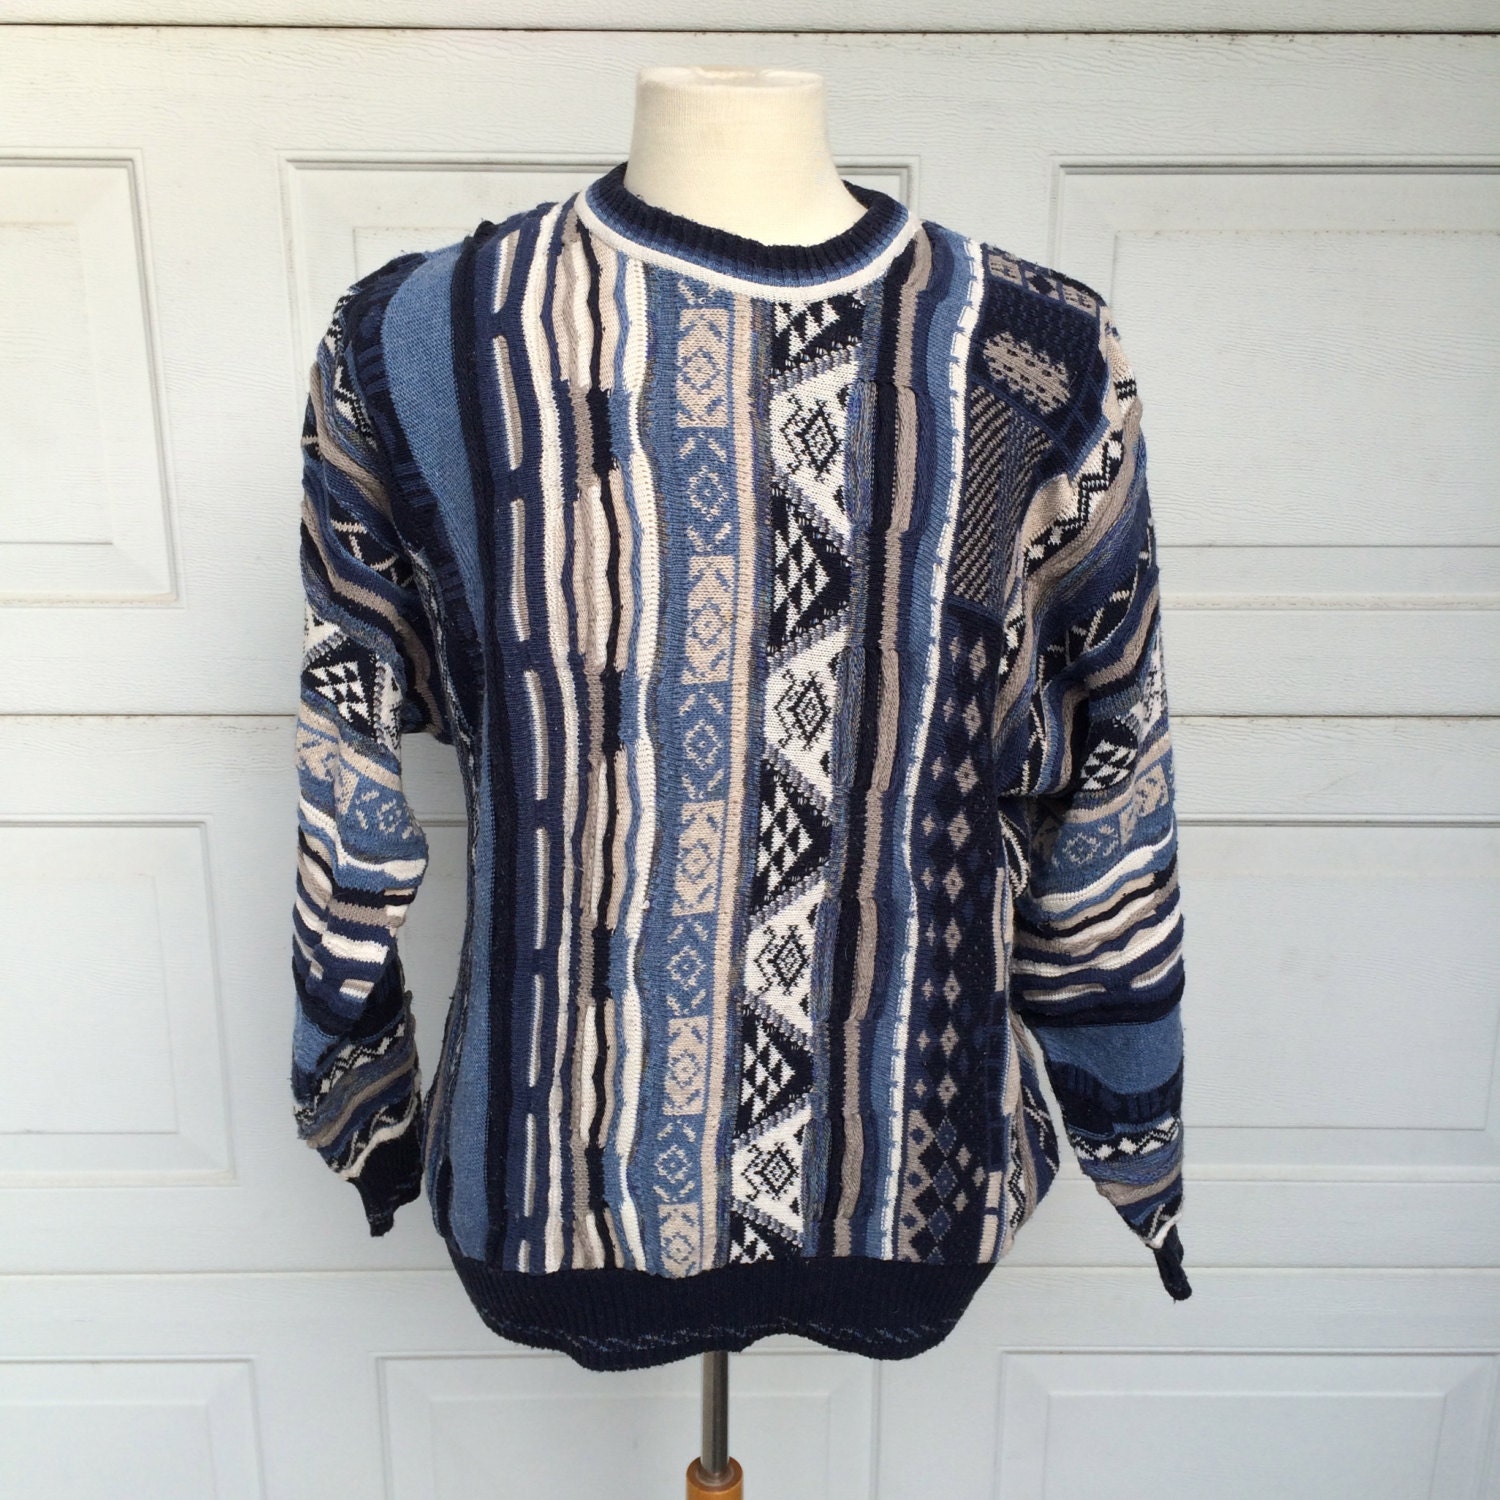 Blue Coogi Style 80s 90s Vintage Textured Knit Sweater Crew